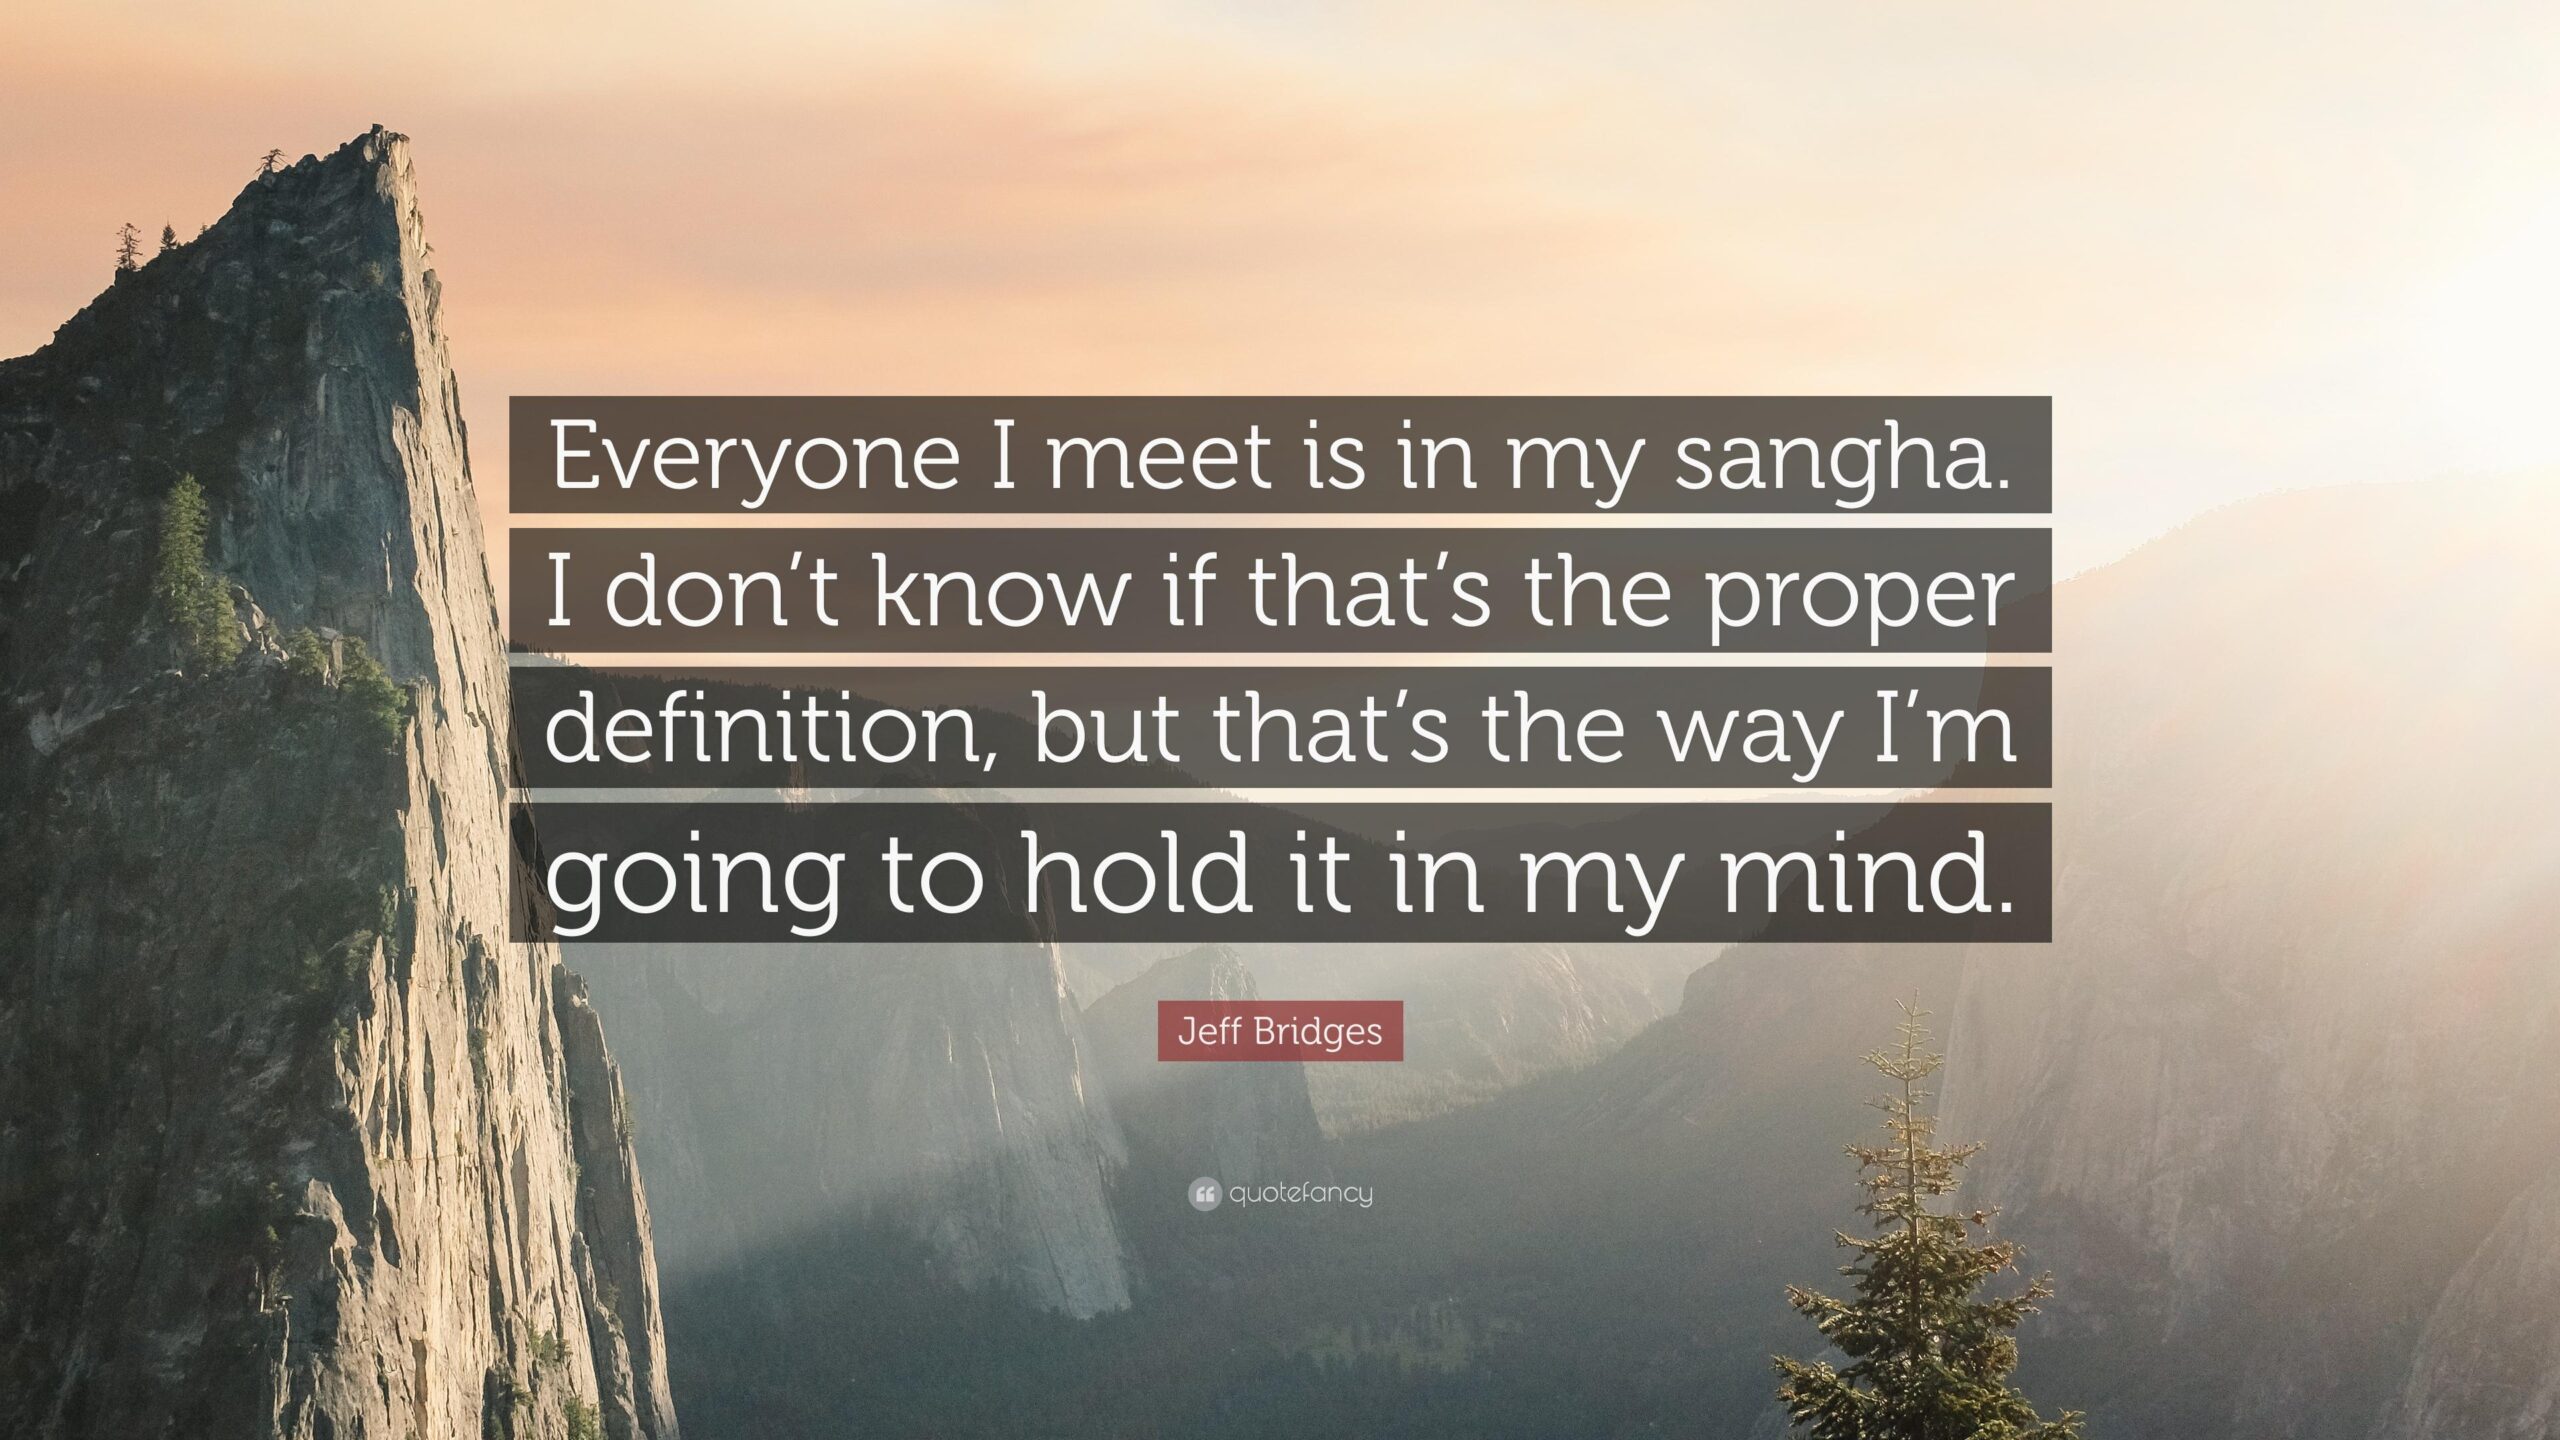 Jeff Bridges Quote “Everyone I meet is in my sangha I don’t know